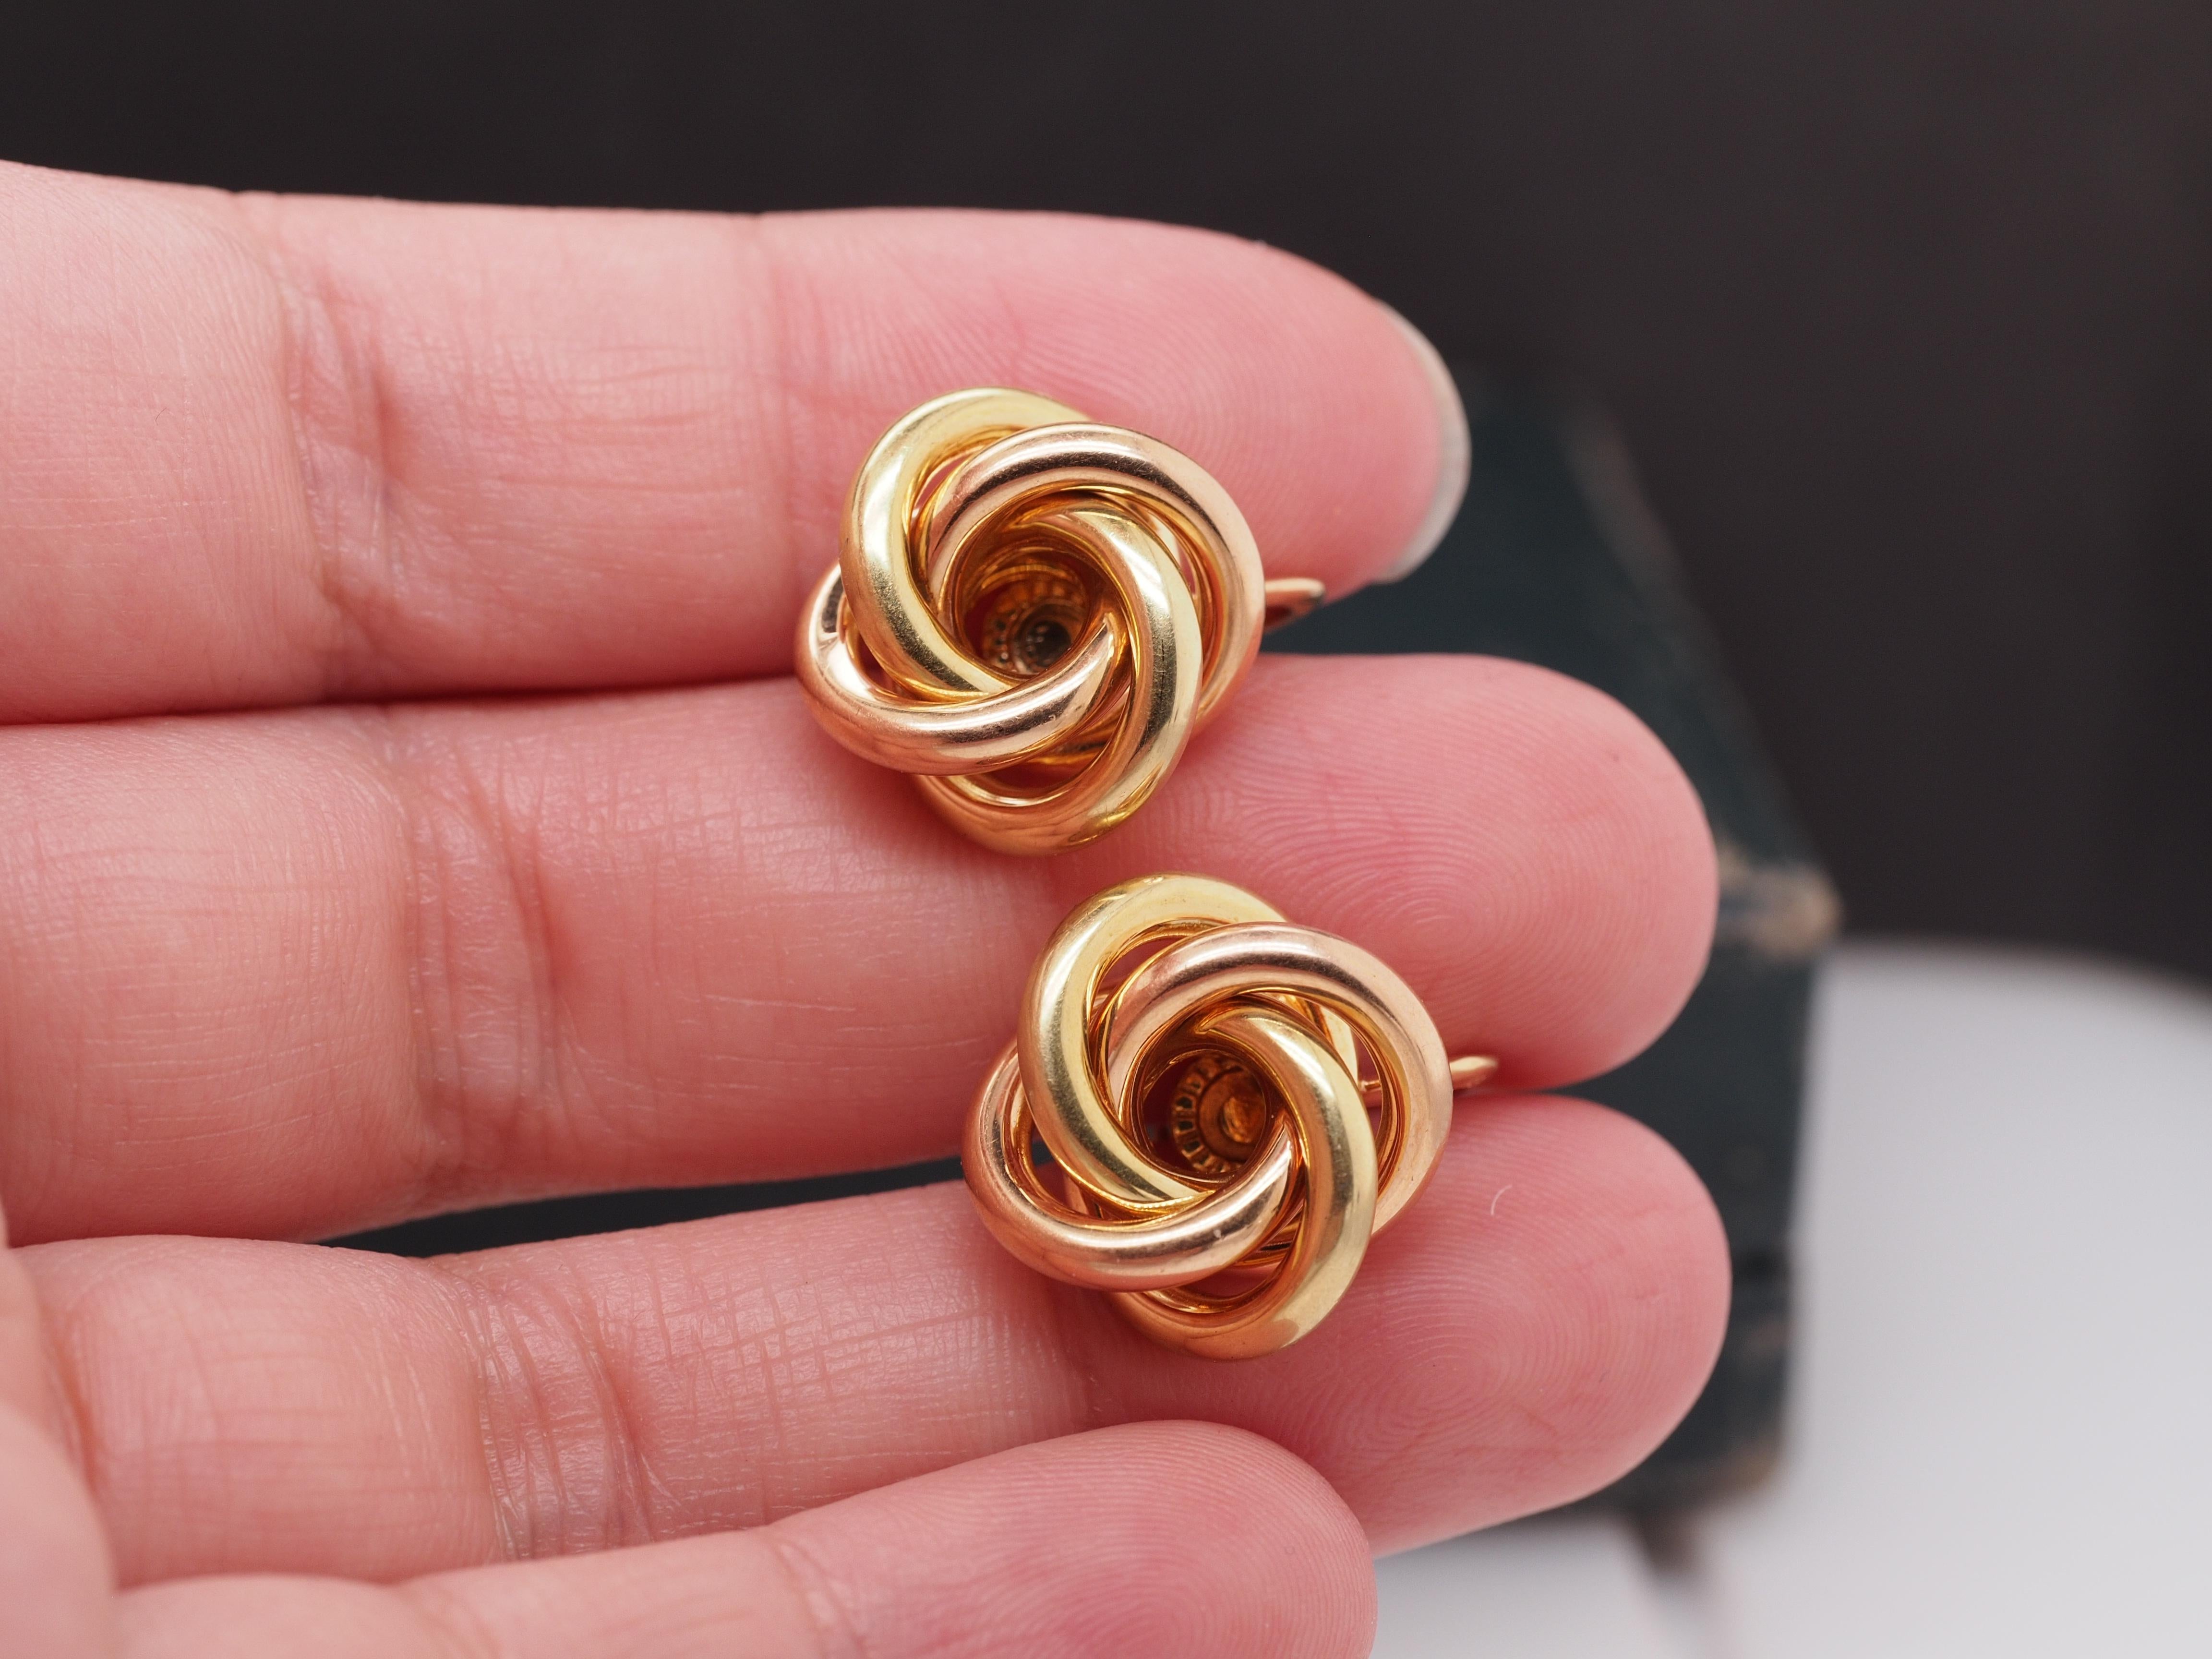 Circa 1950s Tiffany & Co 14K Yellow and Rose Gold Knot Earrings For Sale 1